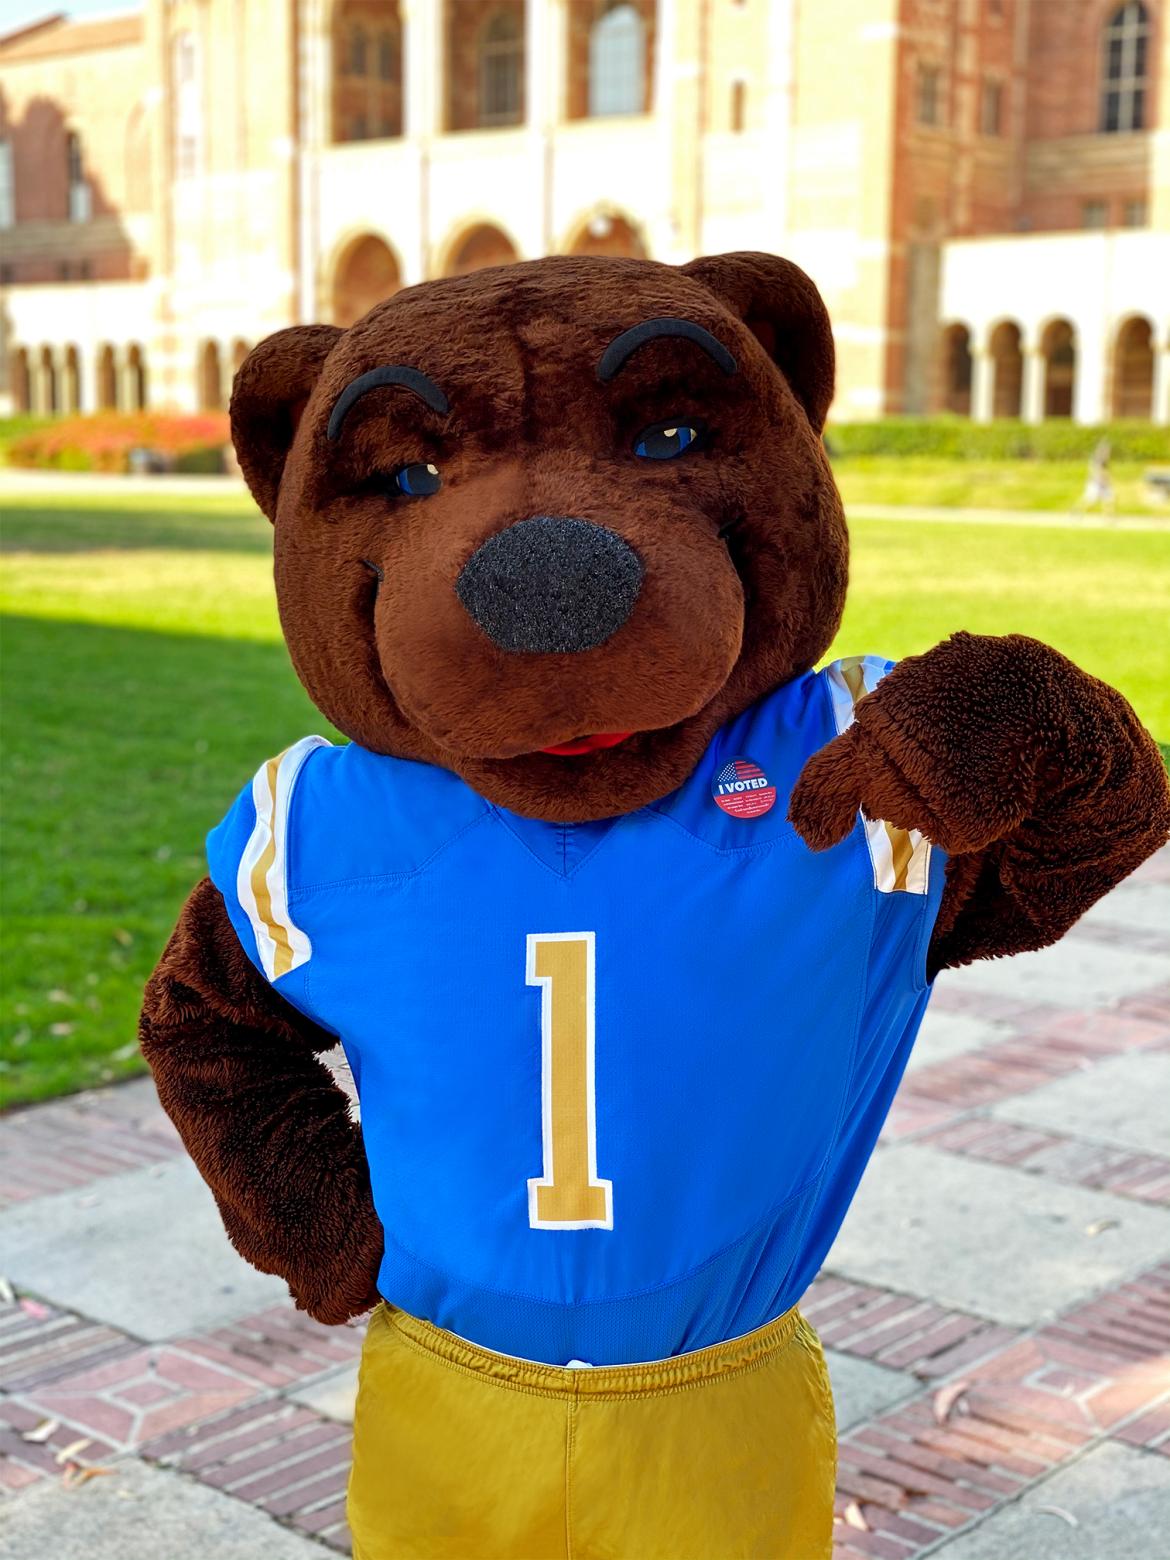 Joe Bruin (Mascot) is wearing a Blue and Yellow sports jersey standing in front of Royce Hall, pointing at a "Voter" button on their top right shirt. 